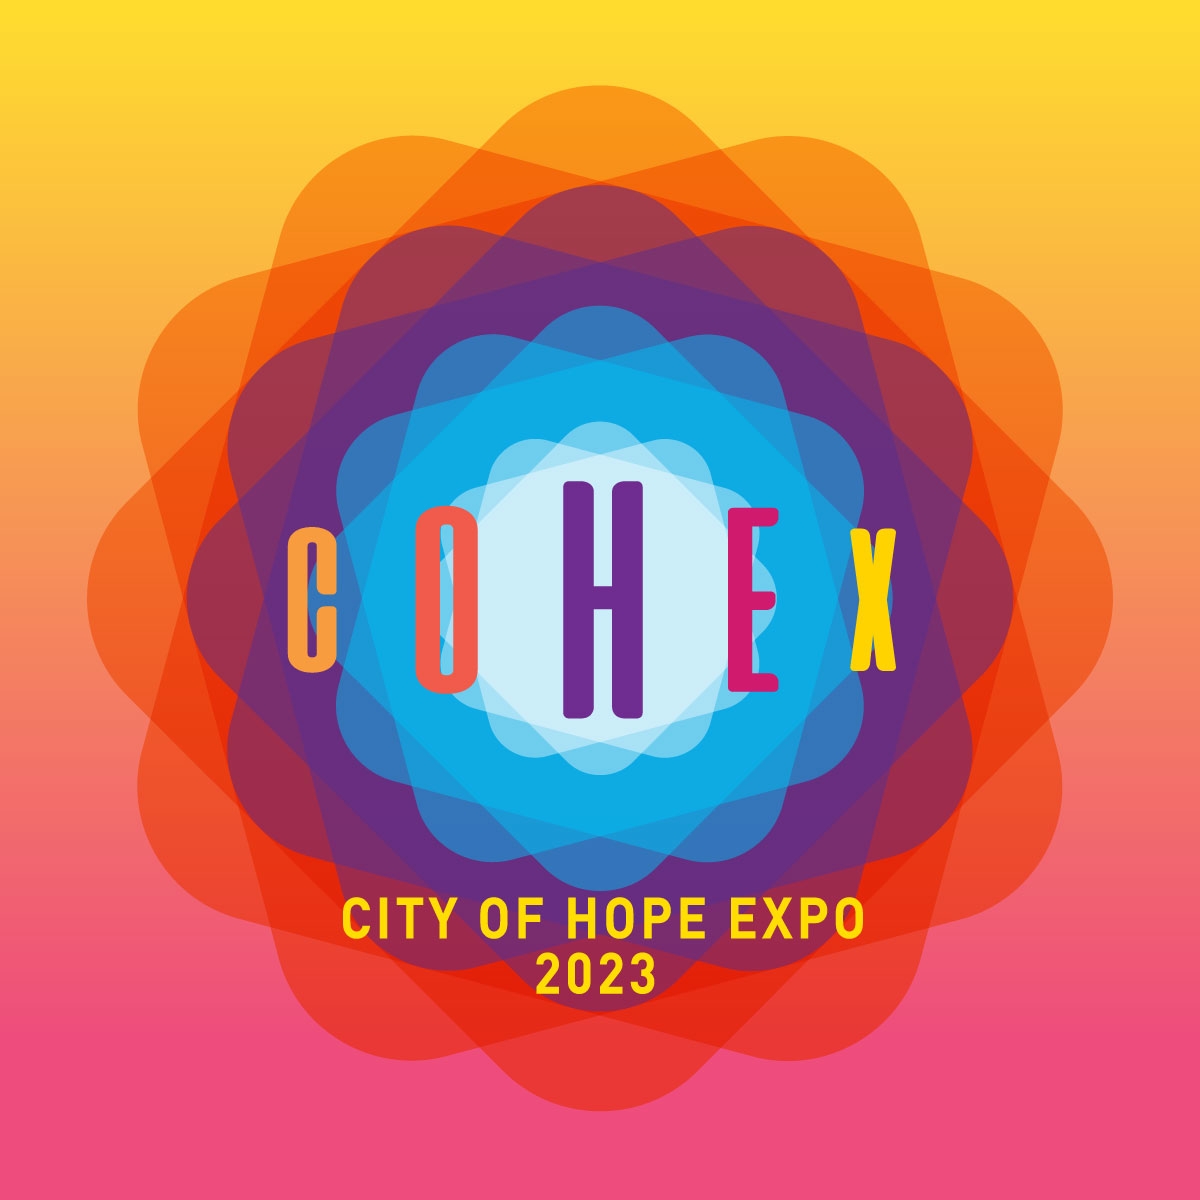 City Of Hope Expo 2023